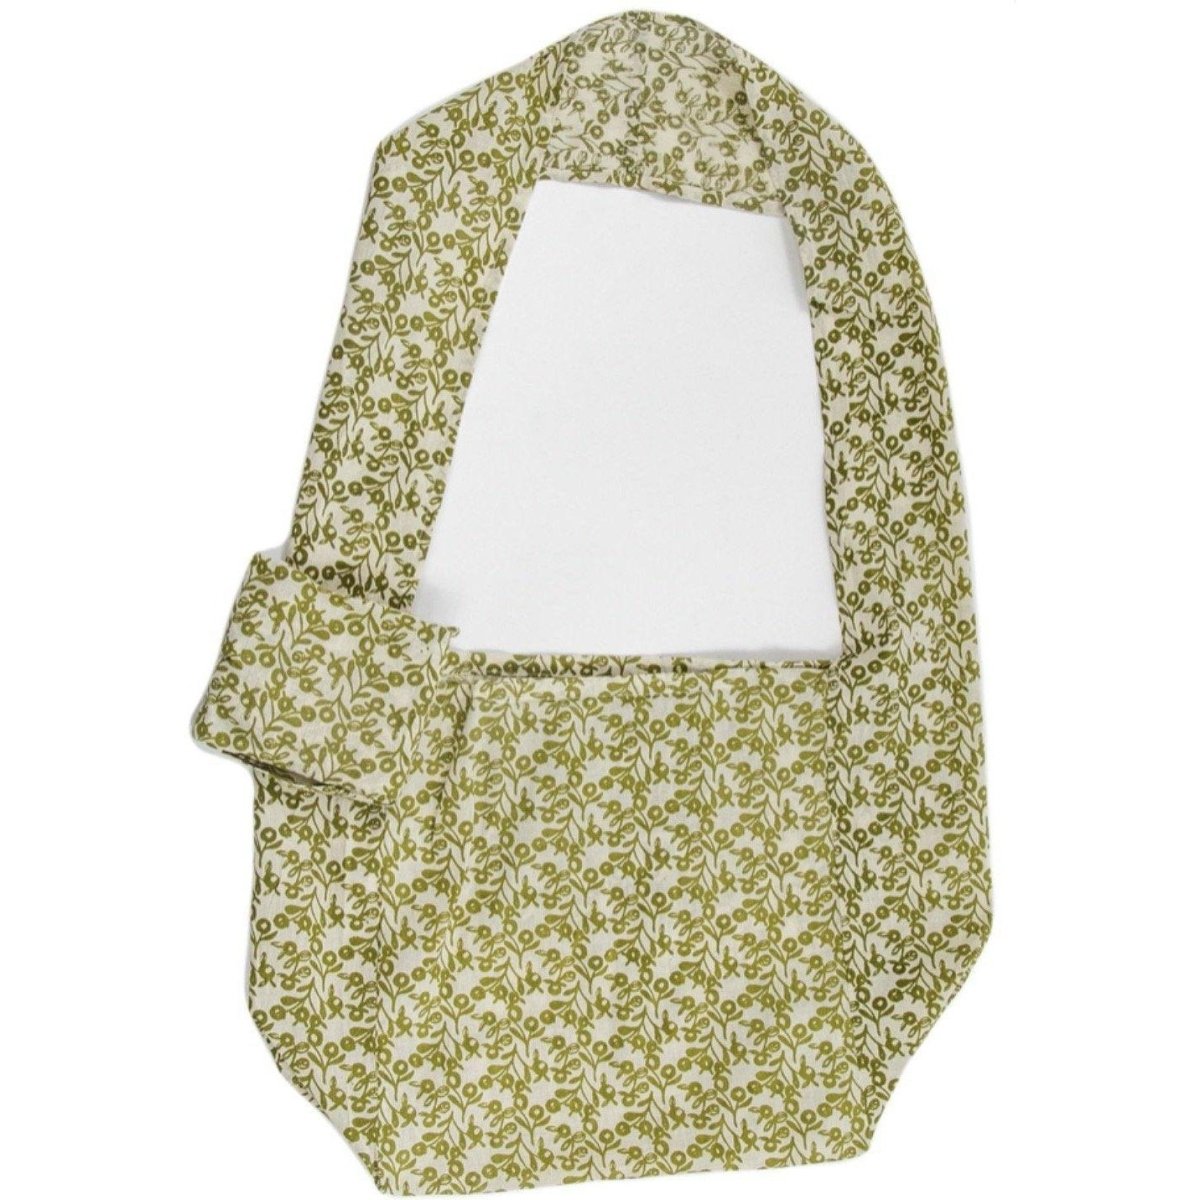 100% Cotton Flora Bag - Lilly Pilly Olive